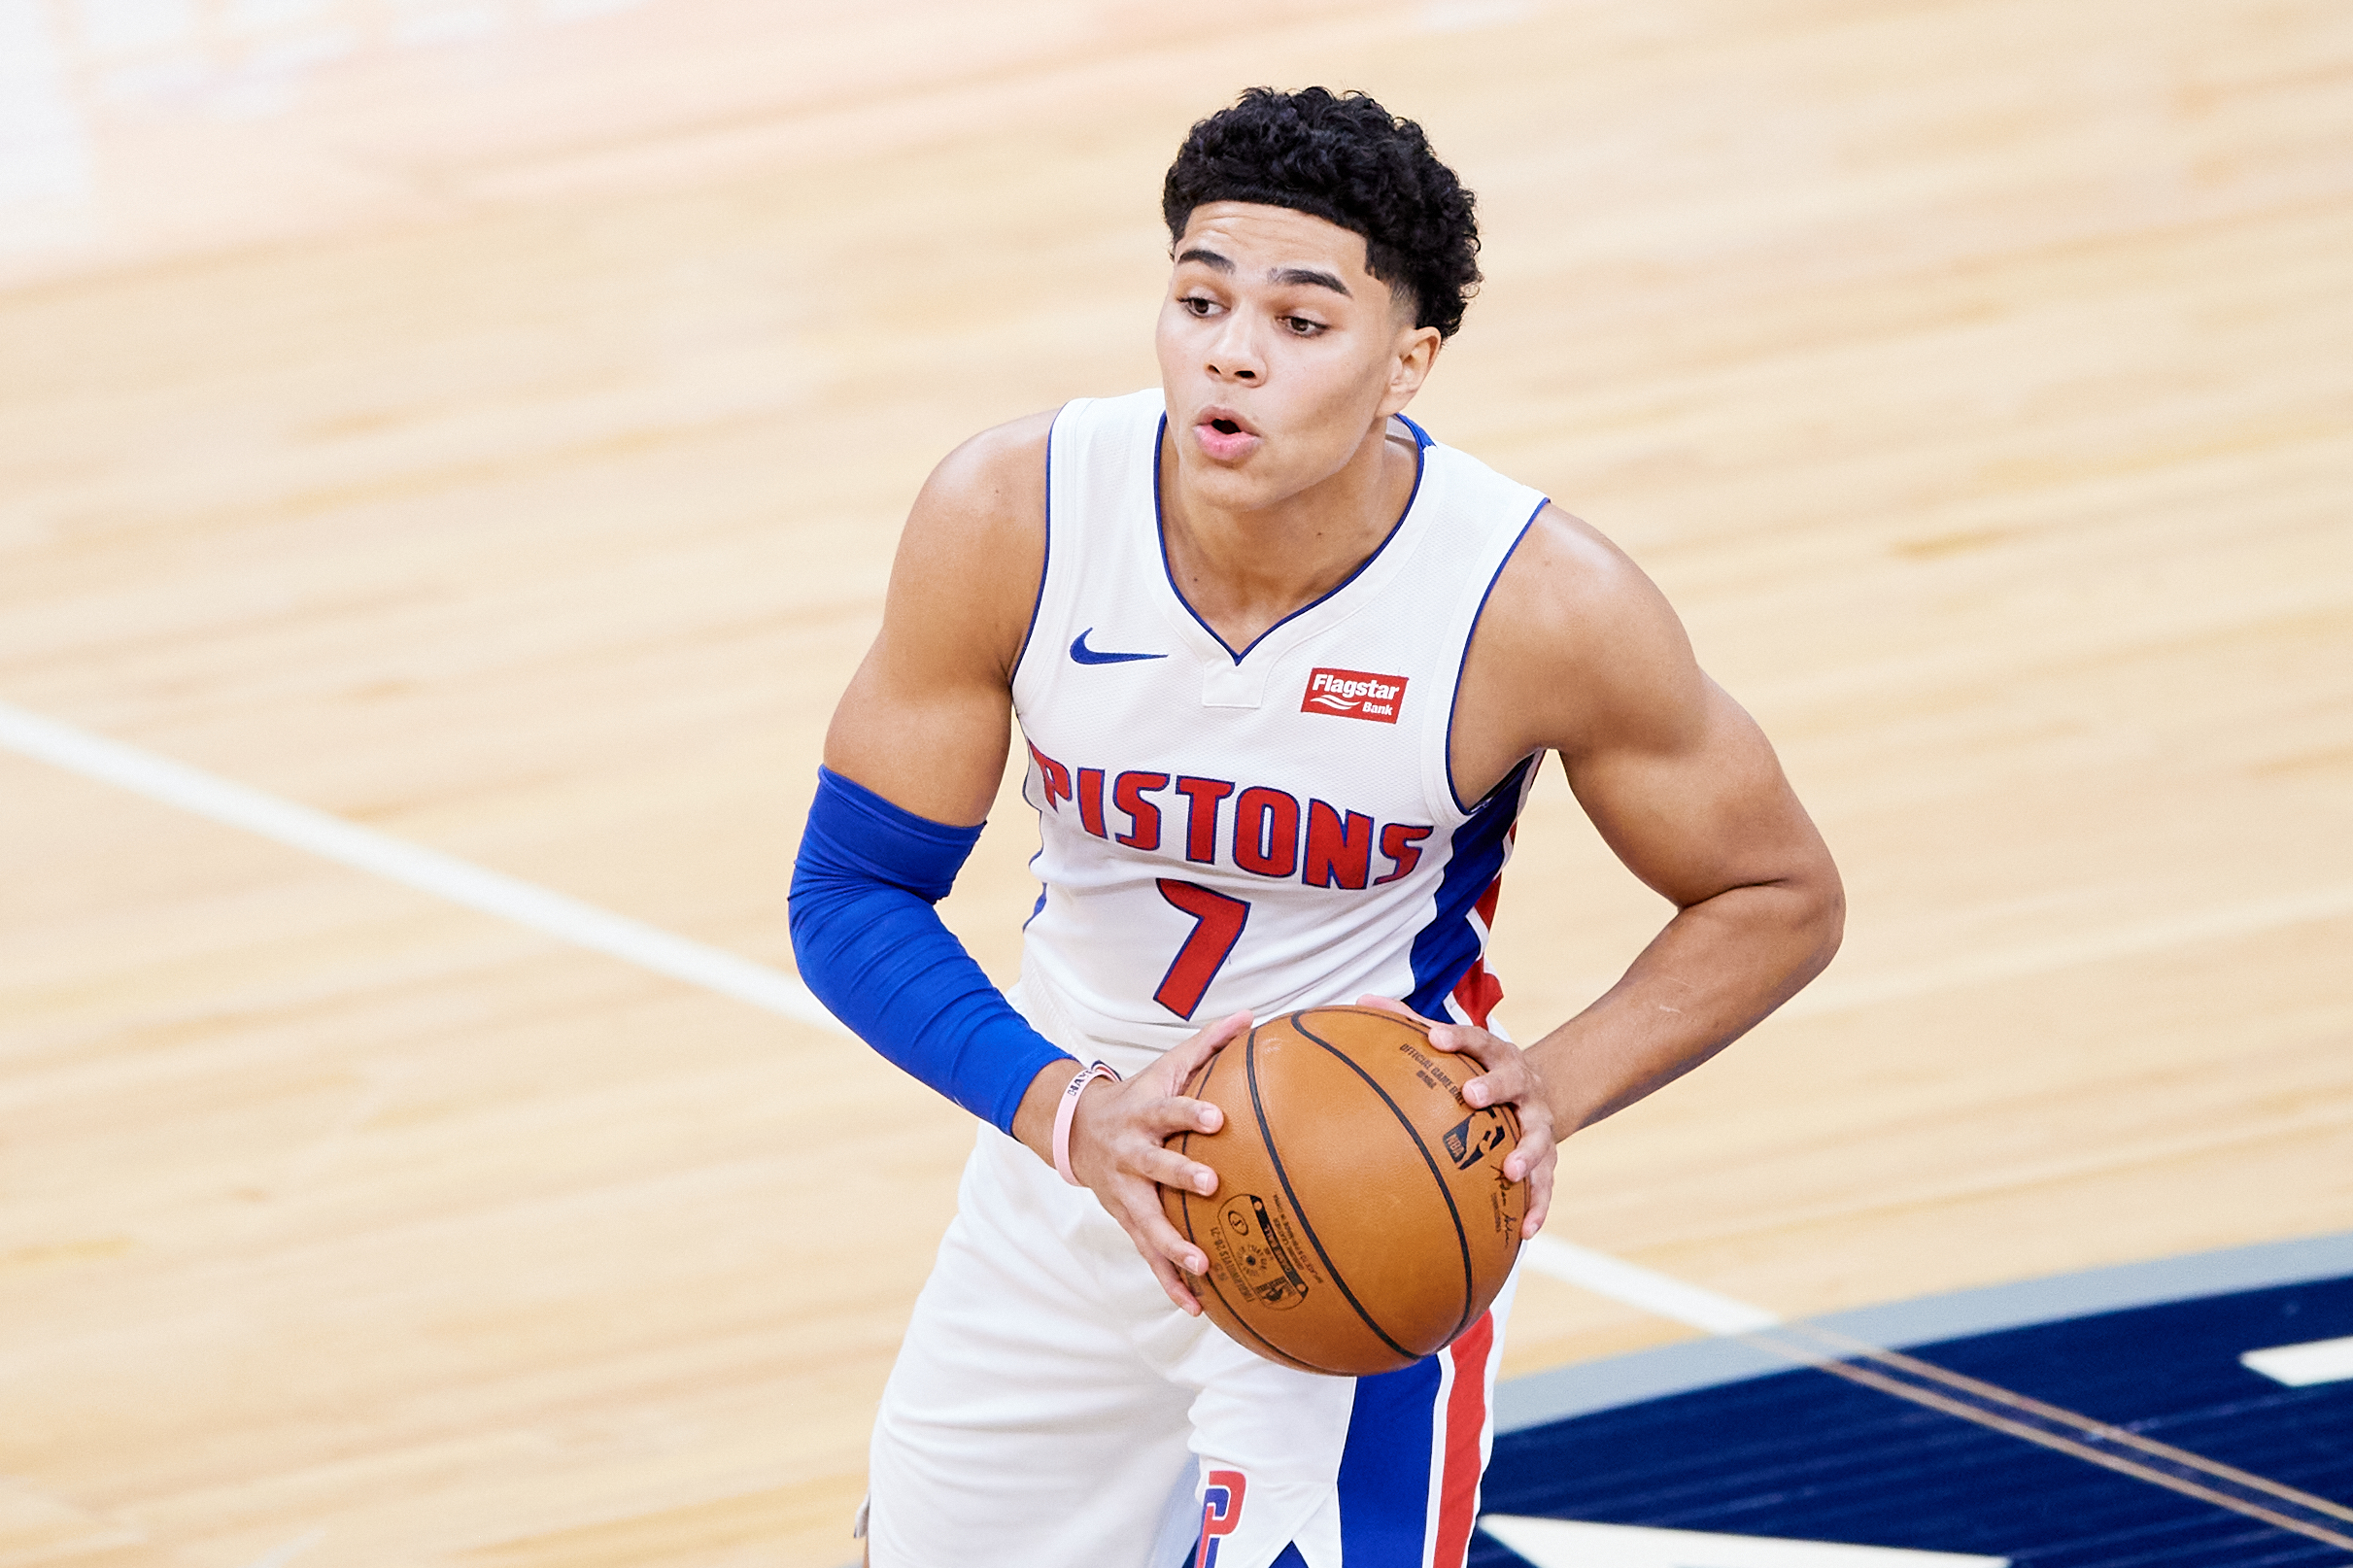 MINNEAPOLIS, MINNESOTA - DECEMBER 23: Killian Hayes #7 of the Detroit Pistons has the ball Minnesota Timberwolves during the season opening game at Target Center on December 23, 2020 in Minneapolis, Minnesota. The Timberwolves defeated the Pistons 111-101. Hannah Foslien/Getty Images